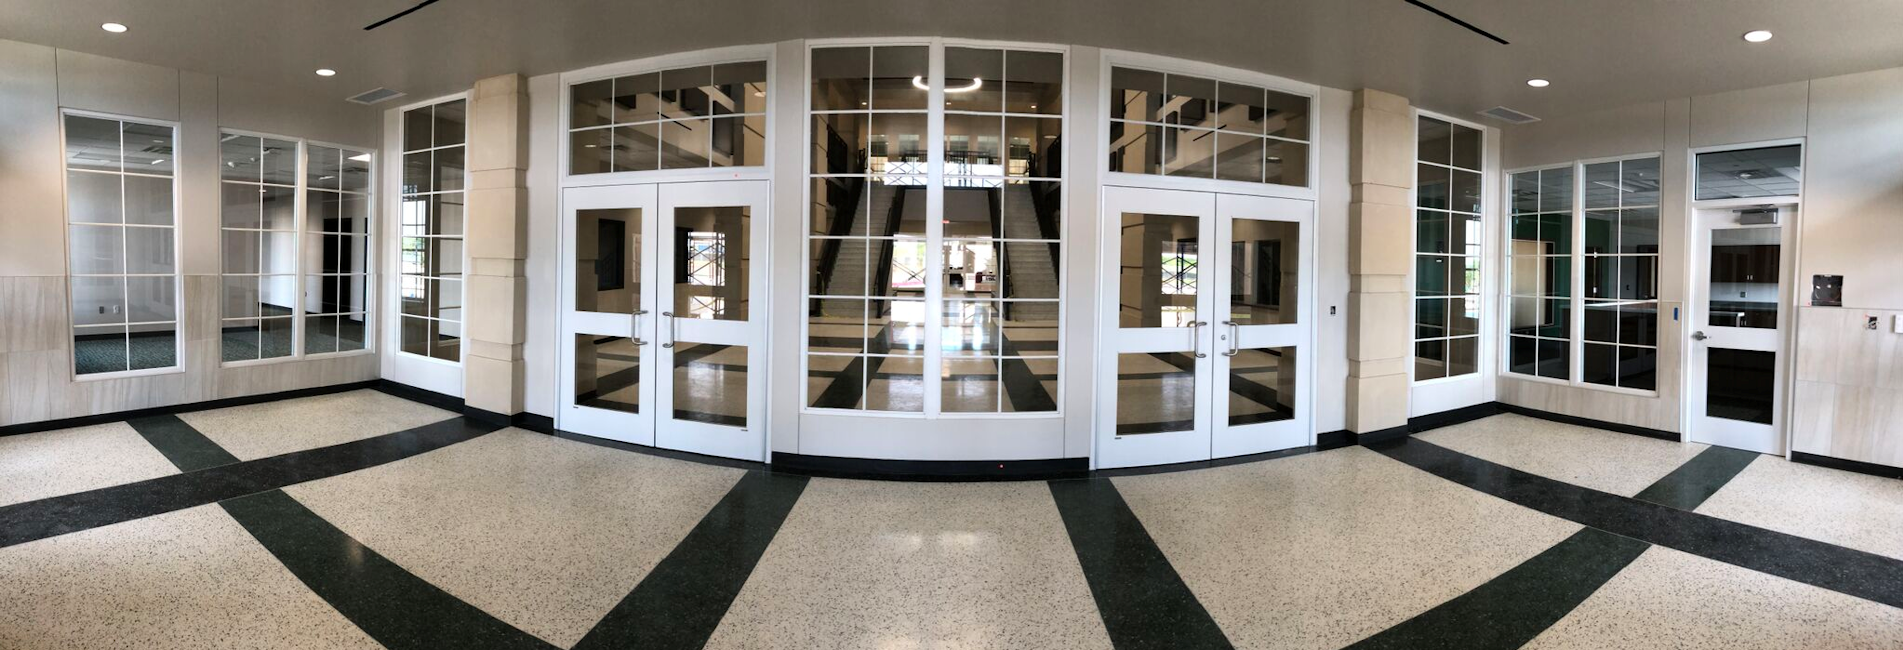 Custom Glass Installer Bedford Texas Dallas Fort Worth Glass & Mirror Installation | Residential Glass | Commercial Glass & Glazing | AB Glass &